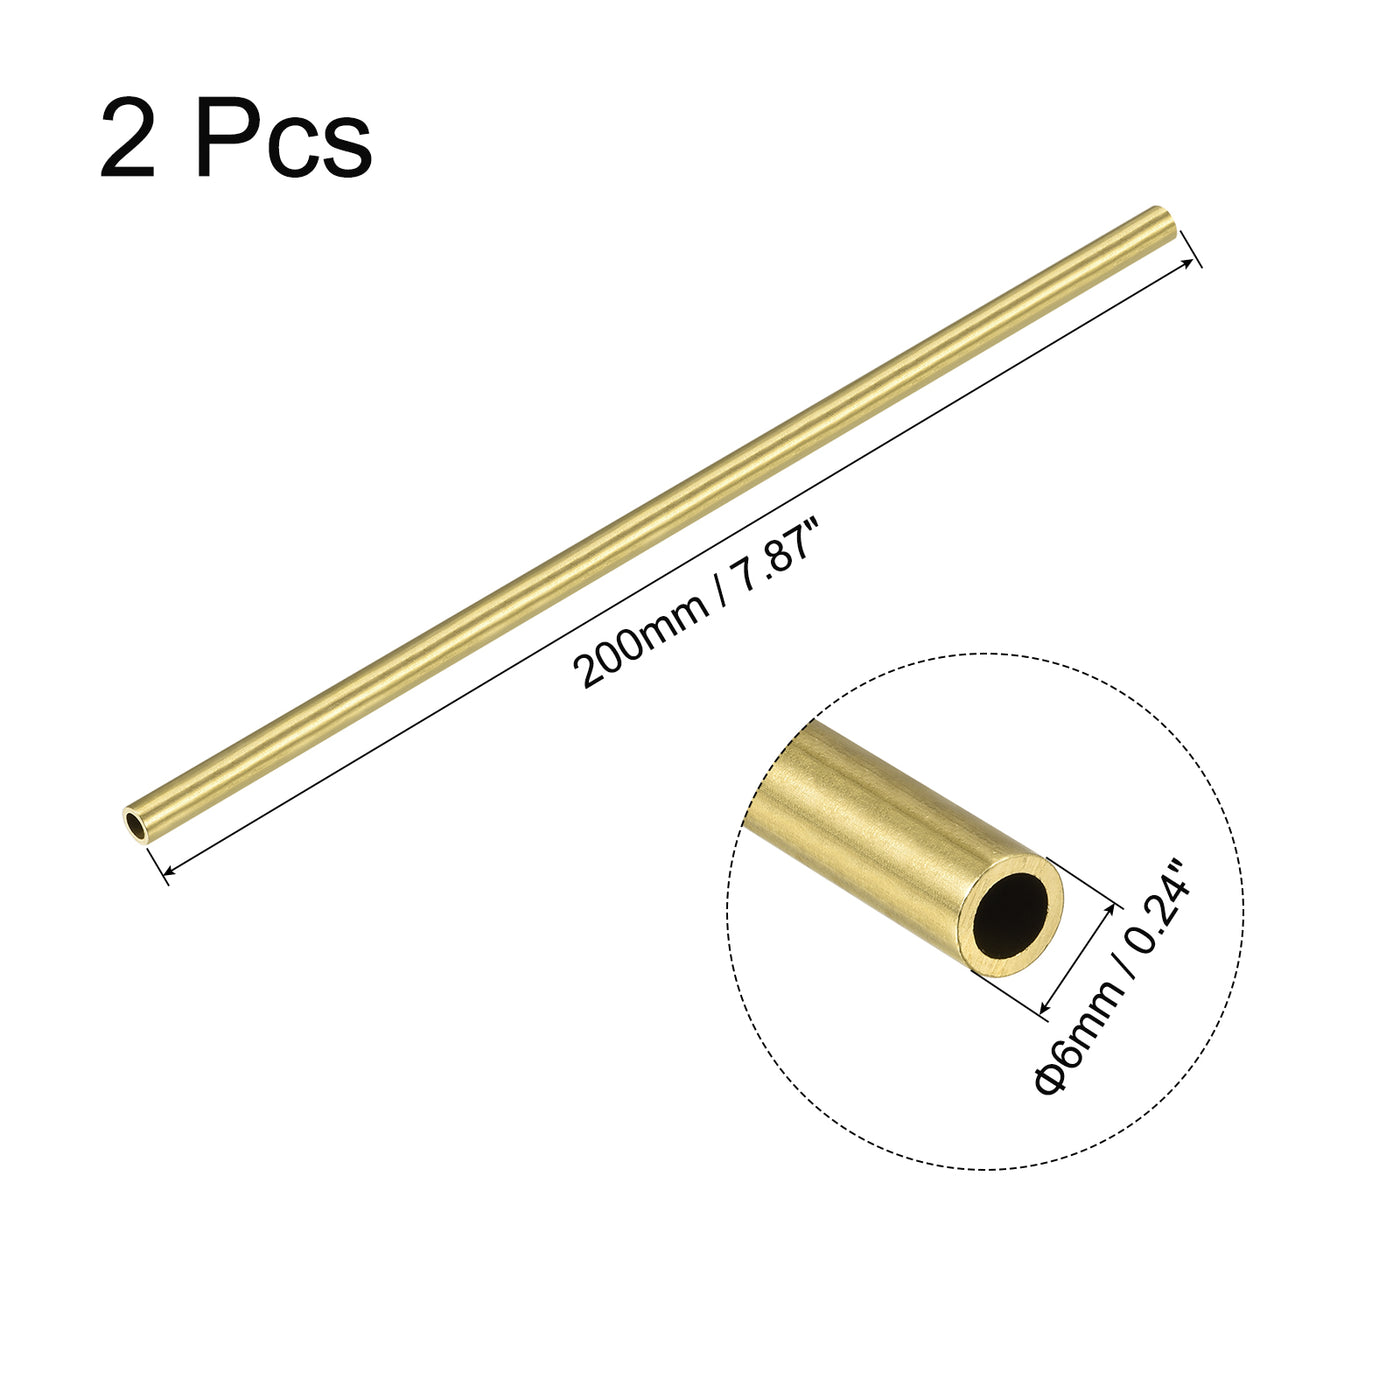 Uxcell Uxcell Brass Round Tube 5mm OD 1mm Wall Thickness 200mm Length Pipe Tubing 2 Pcs